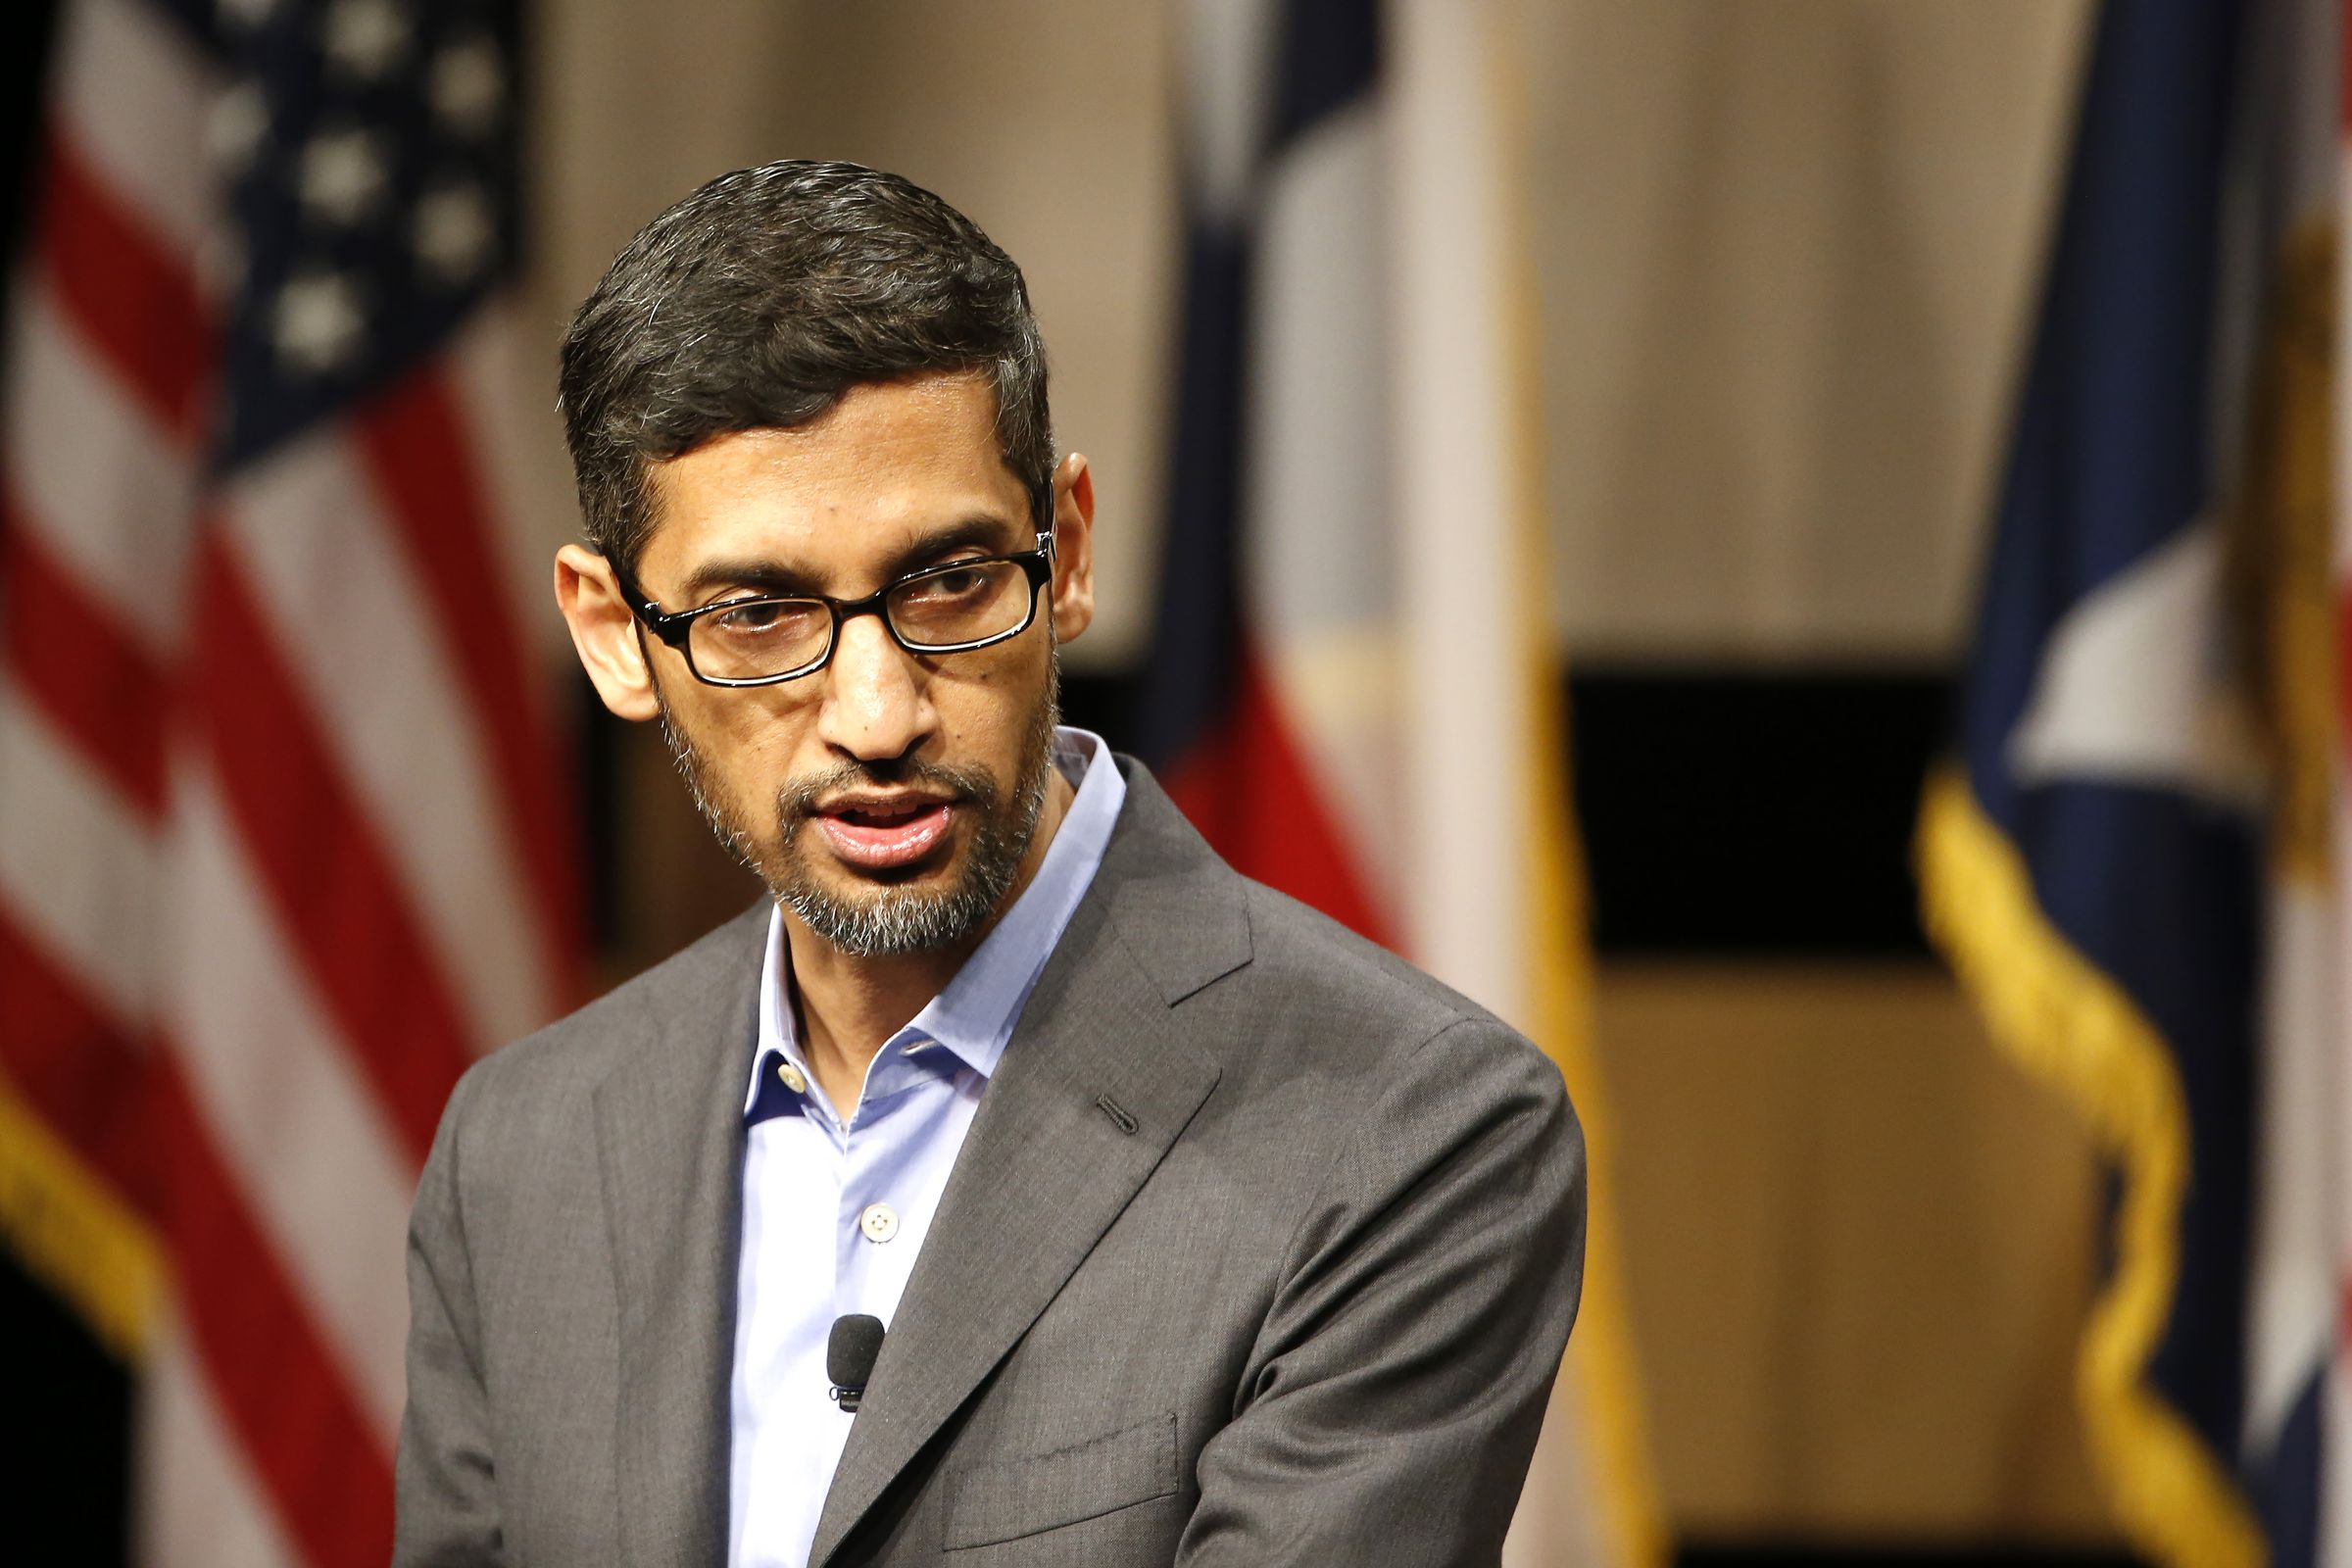 Google CEO Sundar Pichai speaks before signing the White Houses Pledge To America’s Workers at El Centro Community College on October 3rd in Dallas